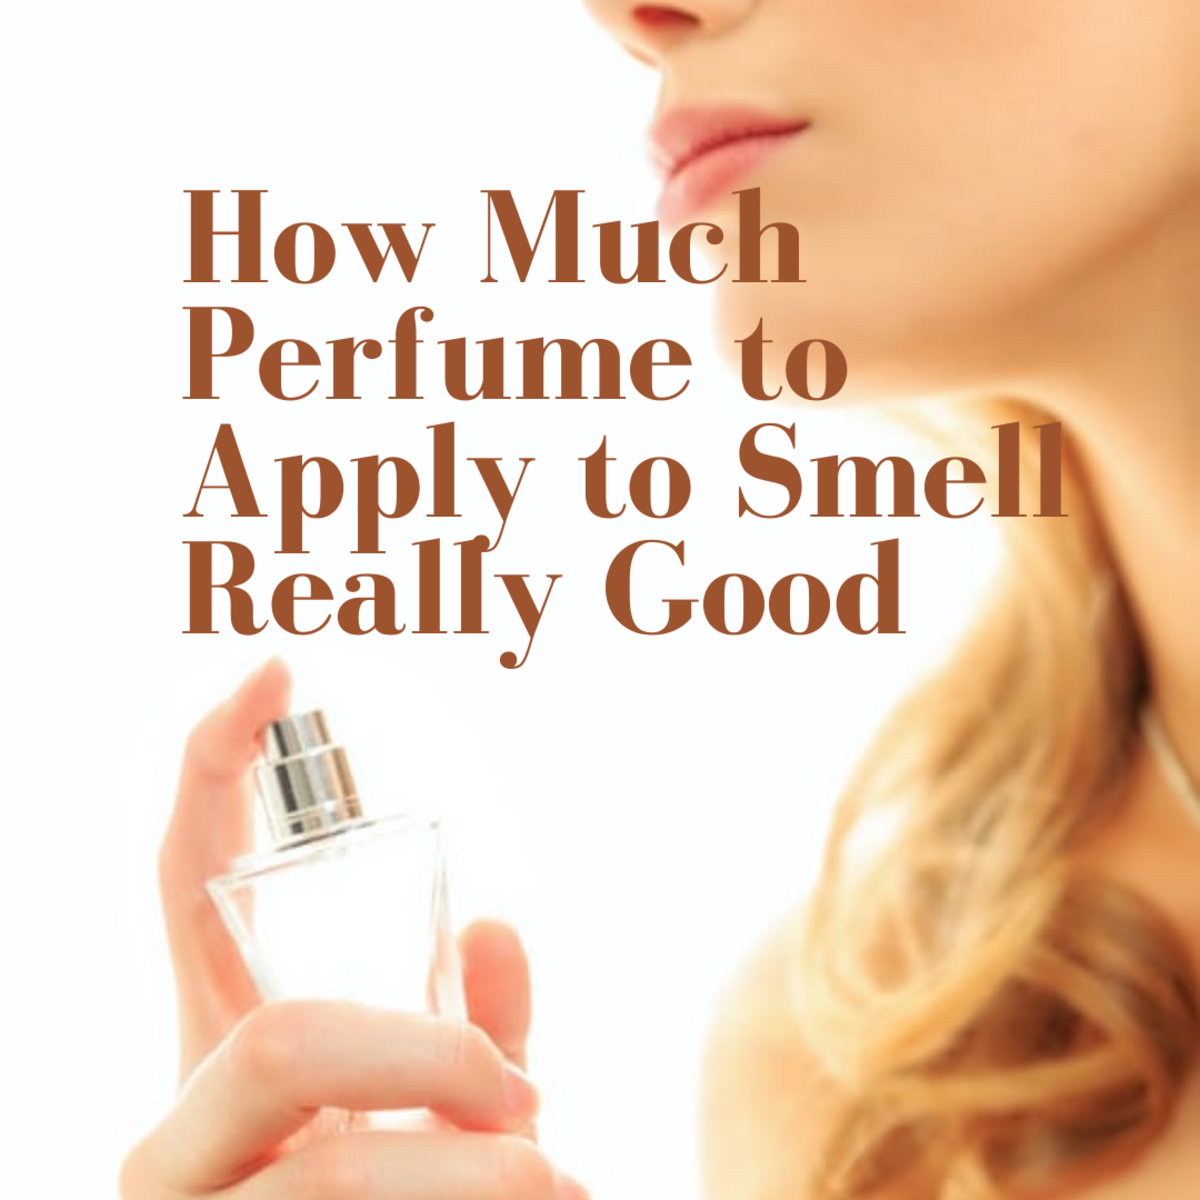 perfume-manners-smelling-just-right-and-longer